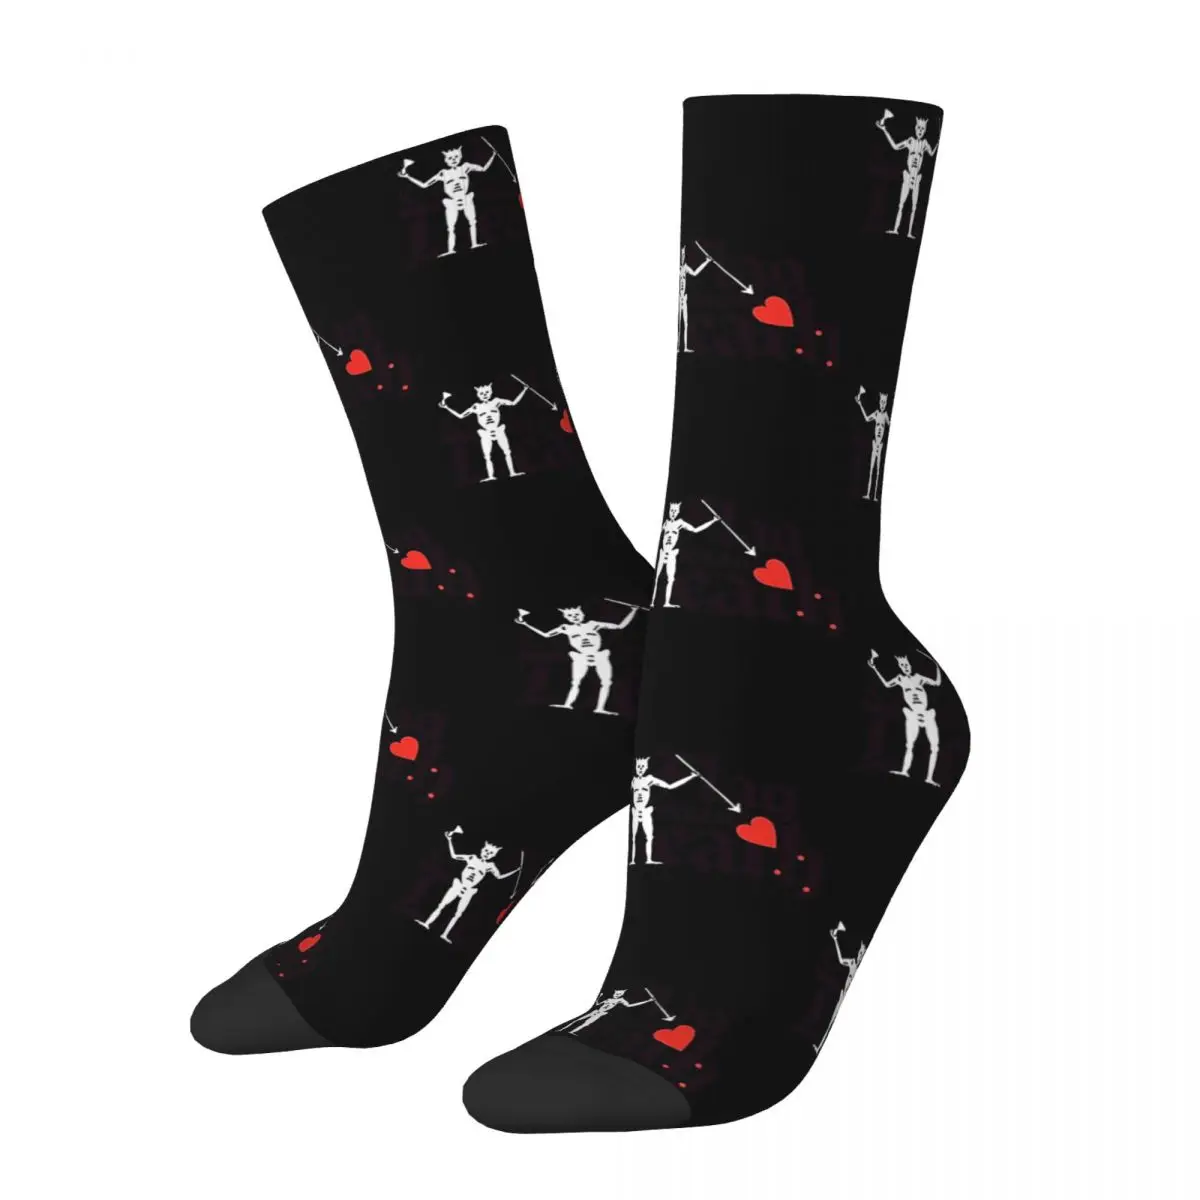 

Our Flag Means Death Blackbeard Socks Harajuku Absorbing Stockings All Season Long Socks Accessories for Man's Woman's Gifts